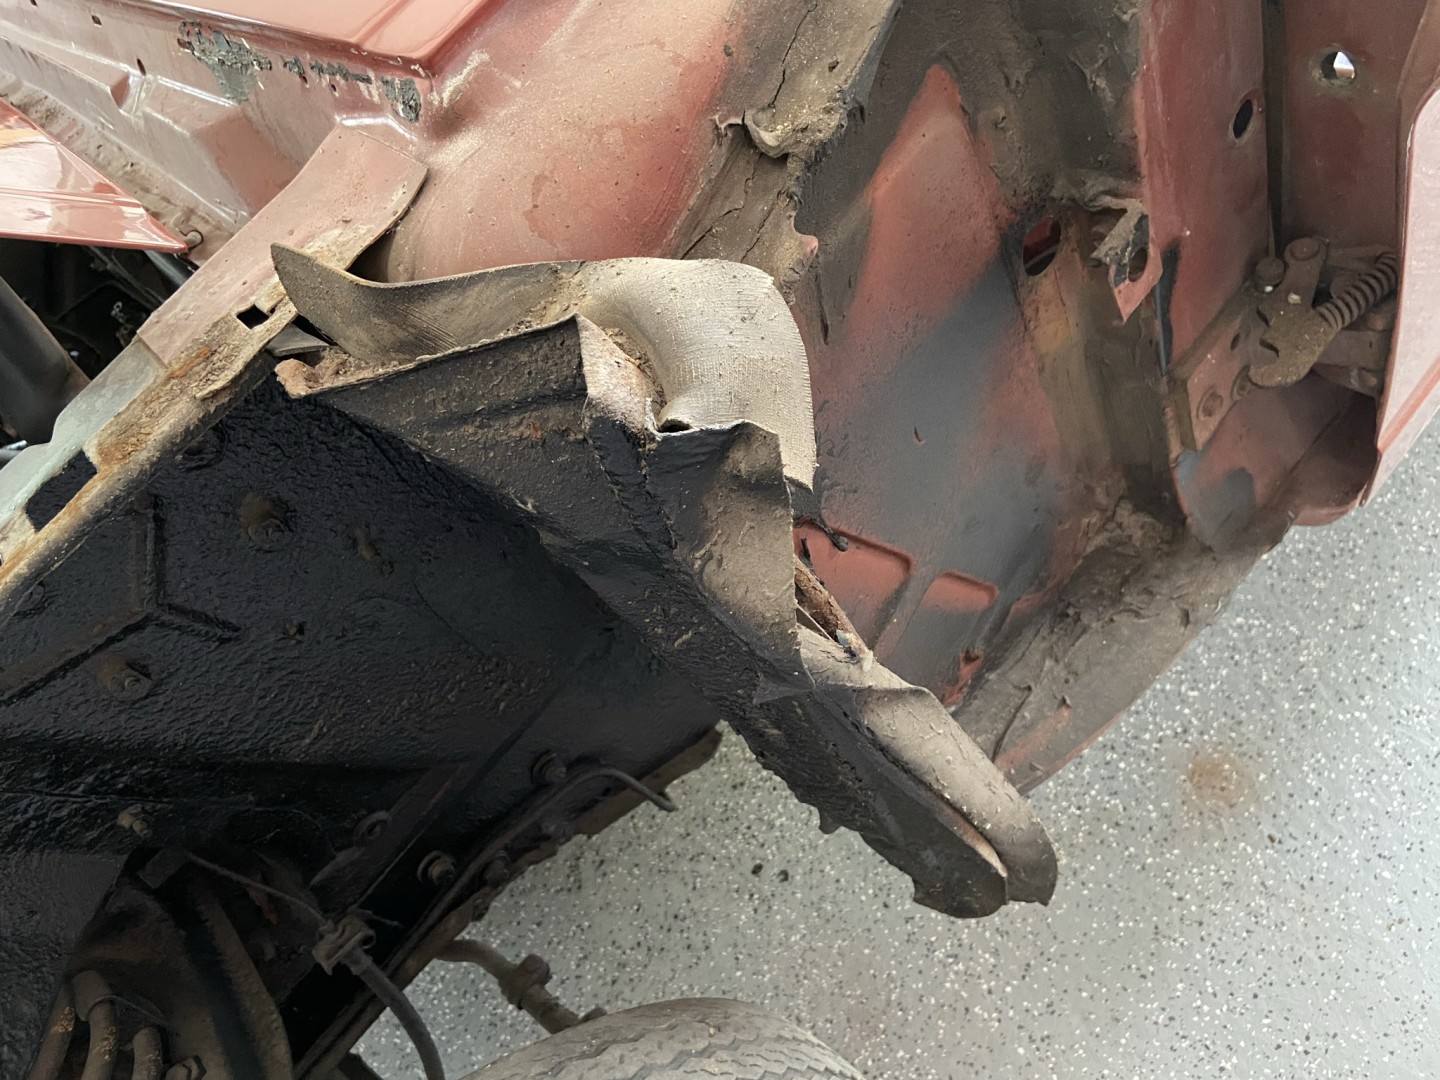 The left front fender had been replaced, but the shop didn't bother to even straighten out the inner fender shield, let alone replace it as they should have.